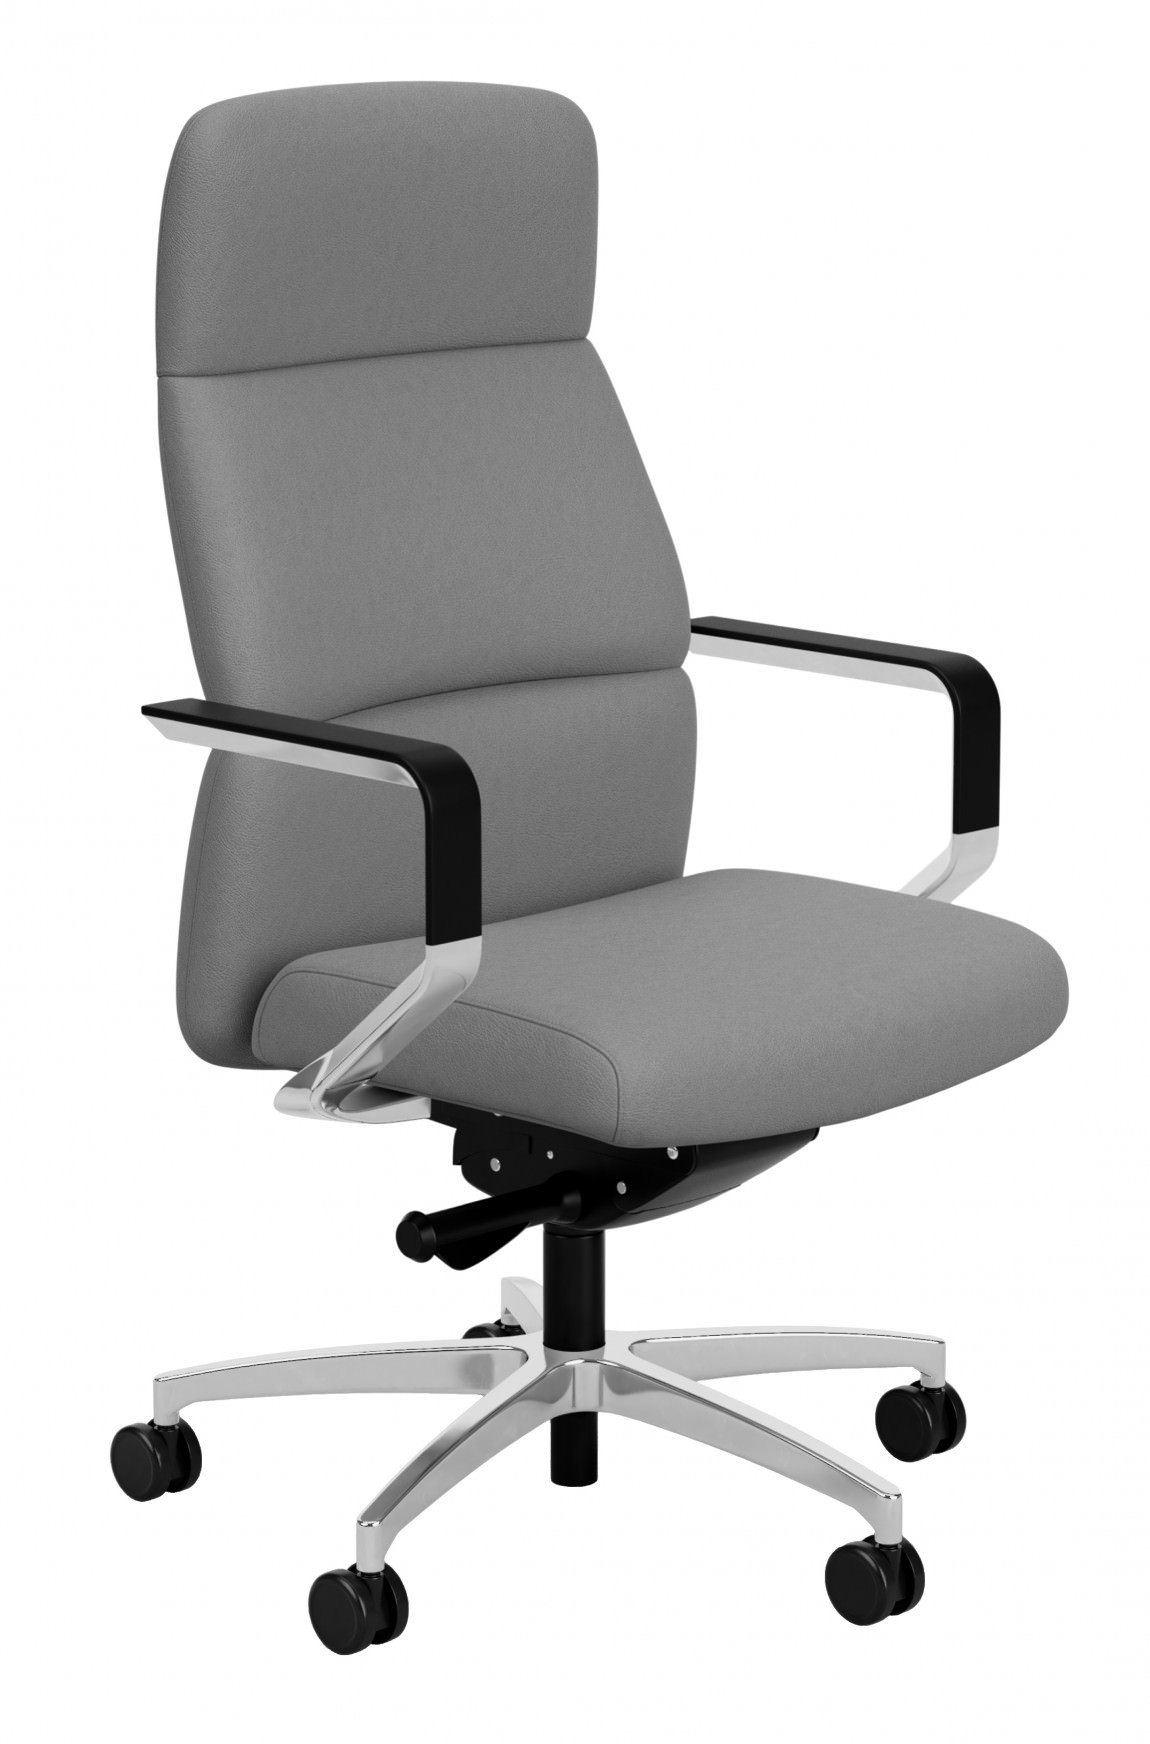 Modern Conference Chair